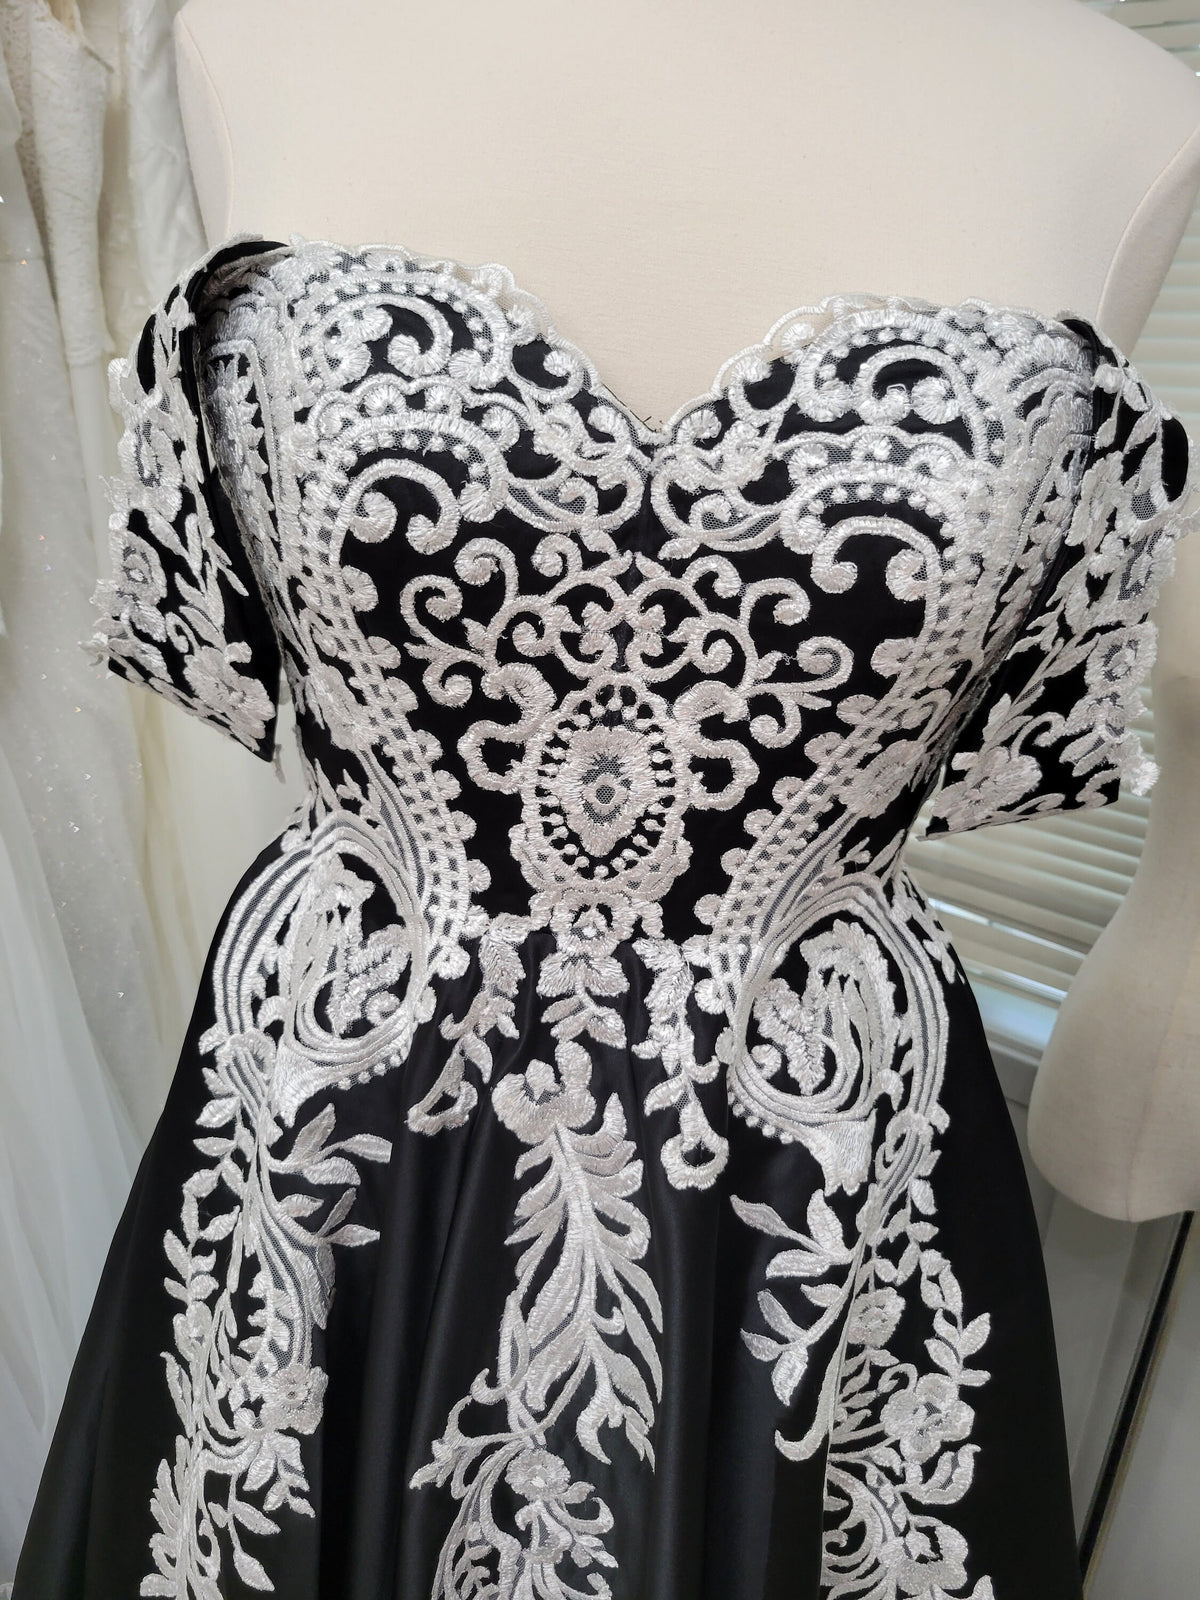 Unique Gothic Black Satin and White Lace Sweetheart Neckline Off The Shoulder with Train Wedding Dress Bridal Gown Lace Up Corset Back